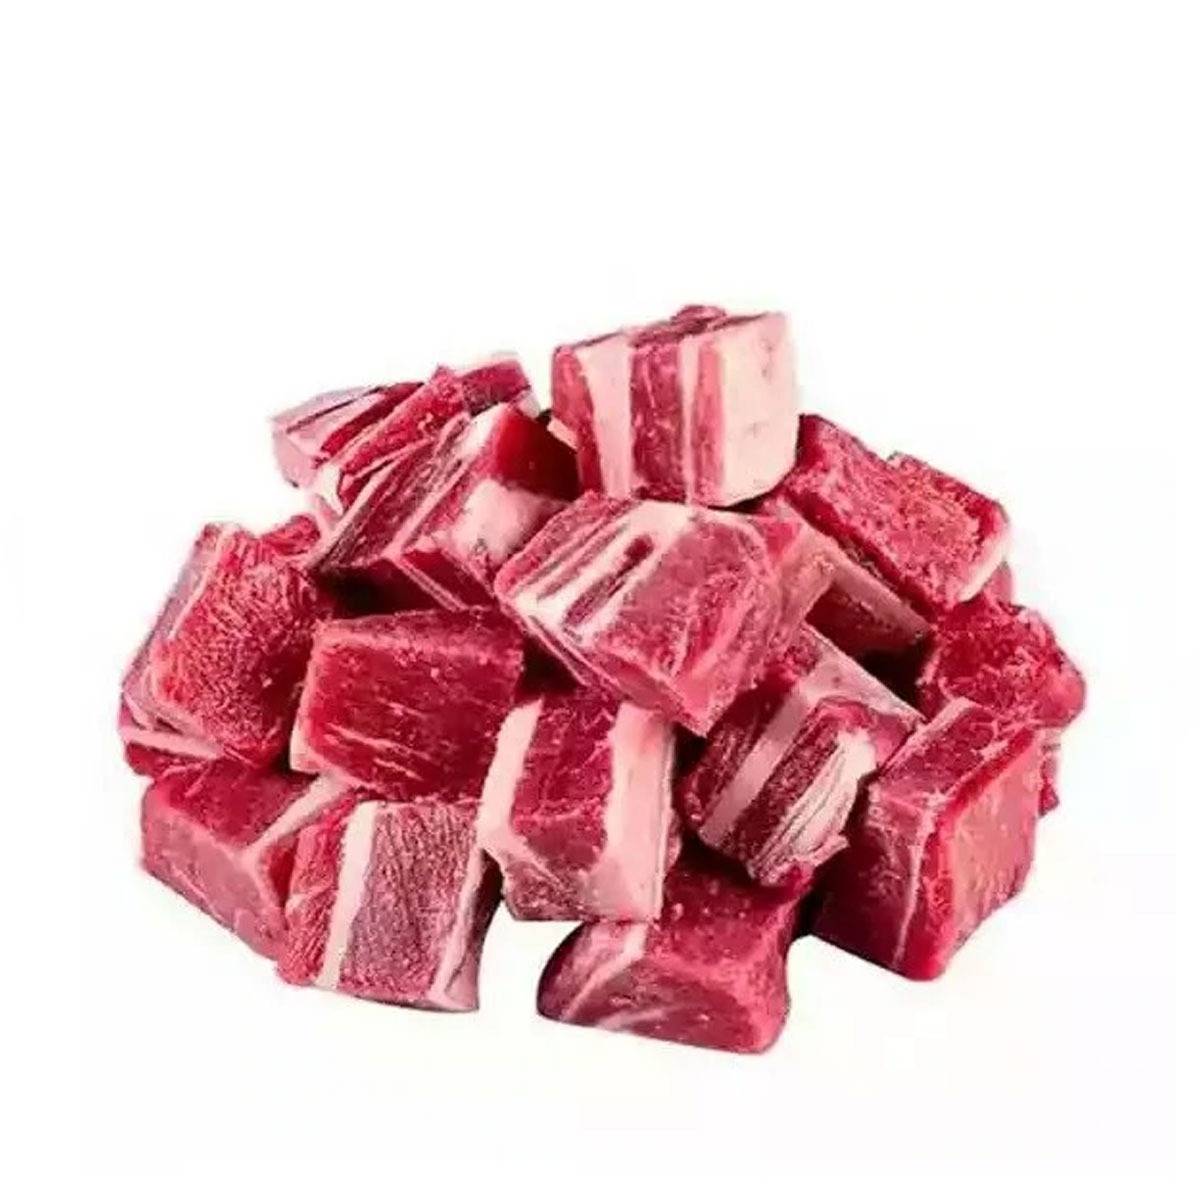 Beef with bone 1kg